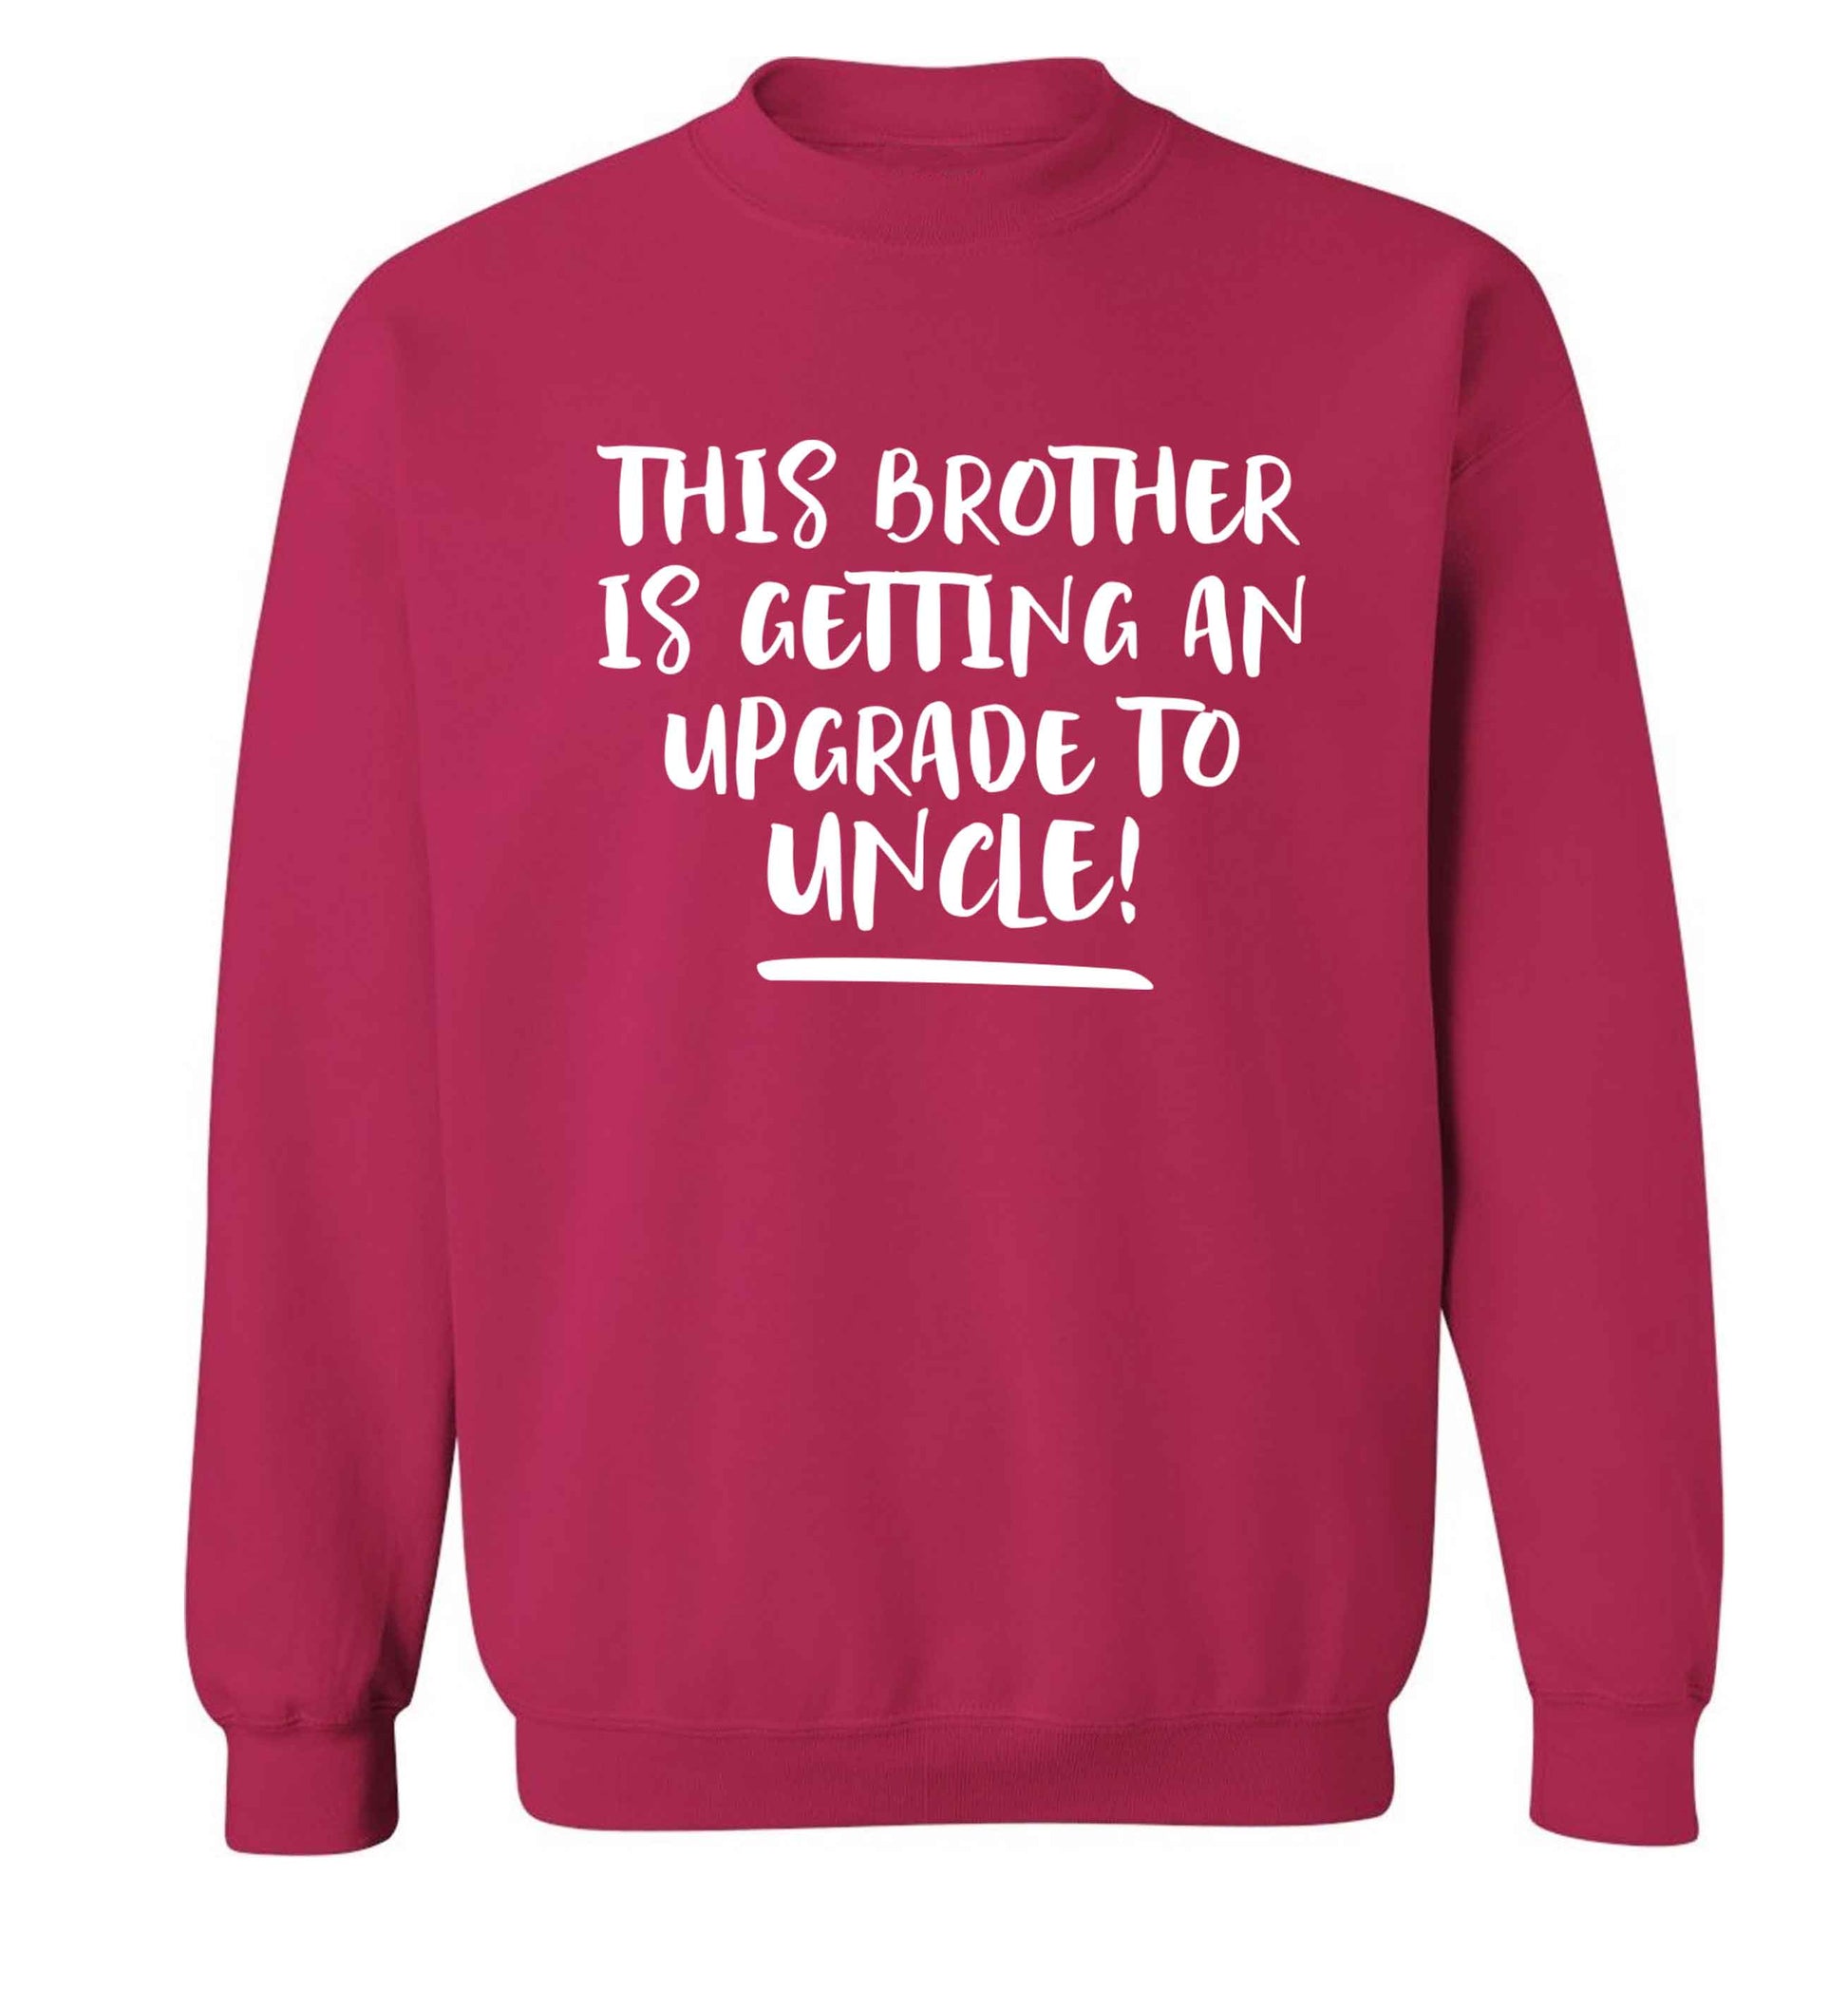 This brother is getting an upgrade to uncle! Adult's unisex pink Sweater 2XL